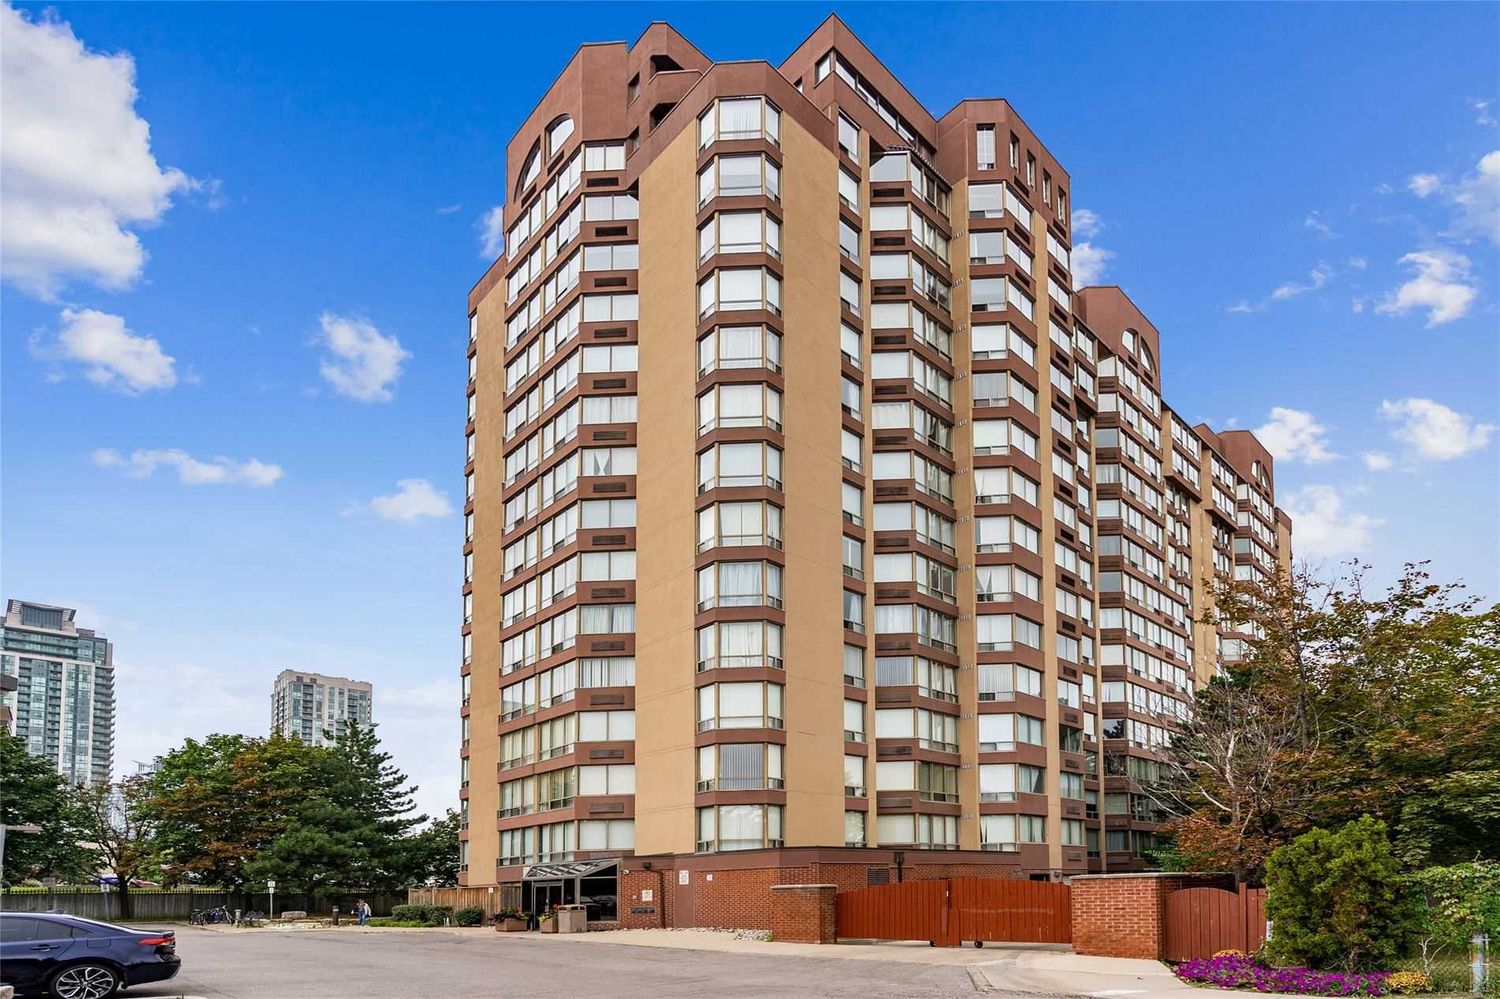 25 Fairview Road W. The Fairmont Condos is located in  Mississauga, Toronto - image #2 of 2